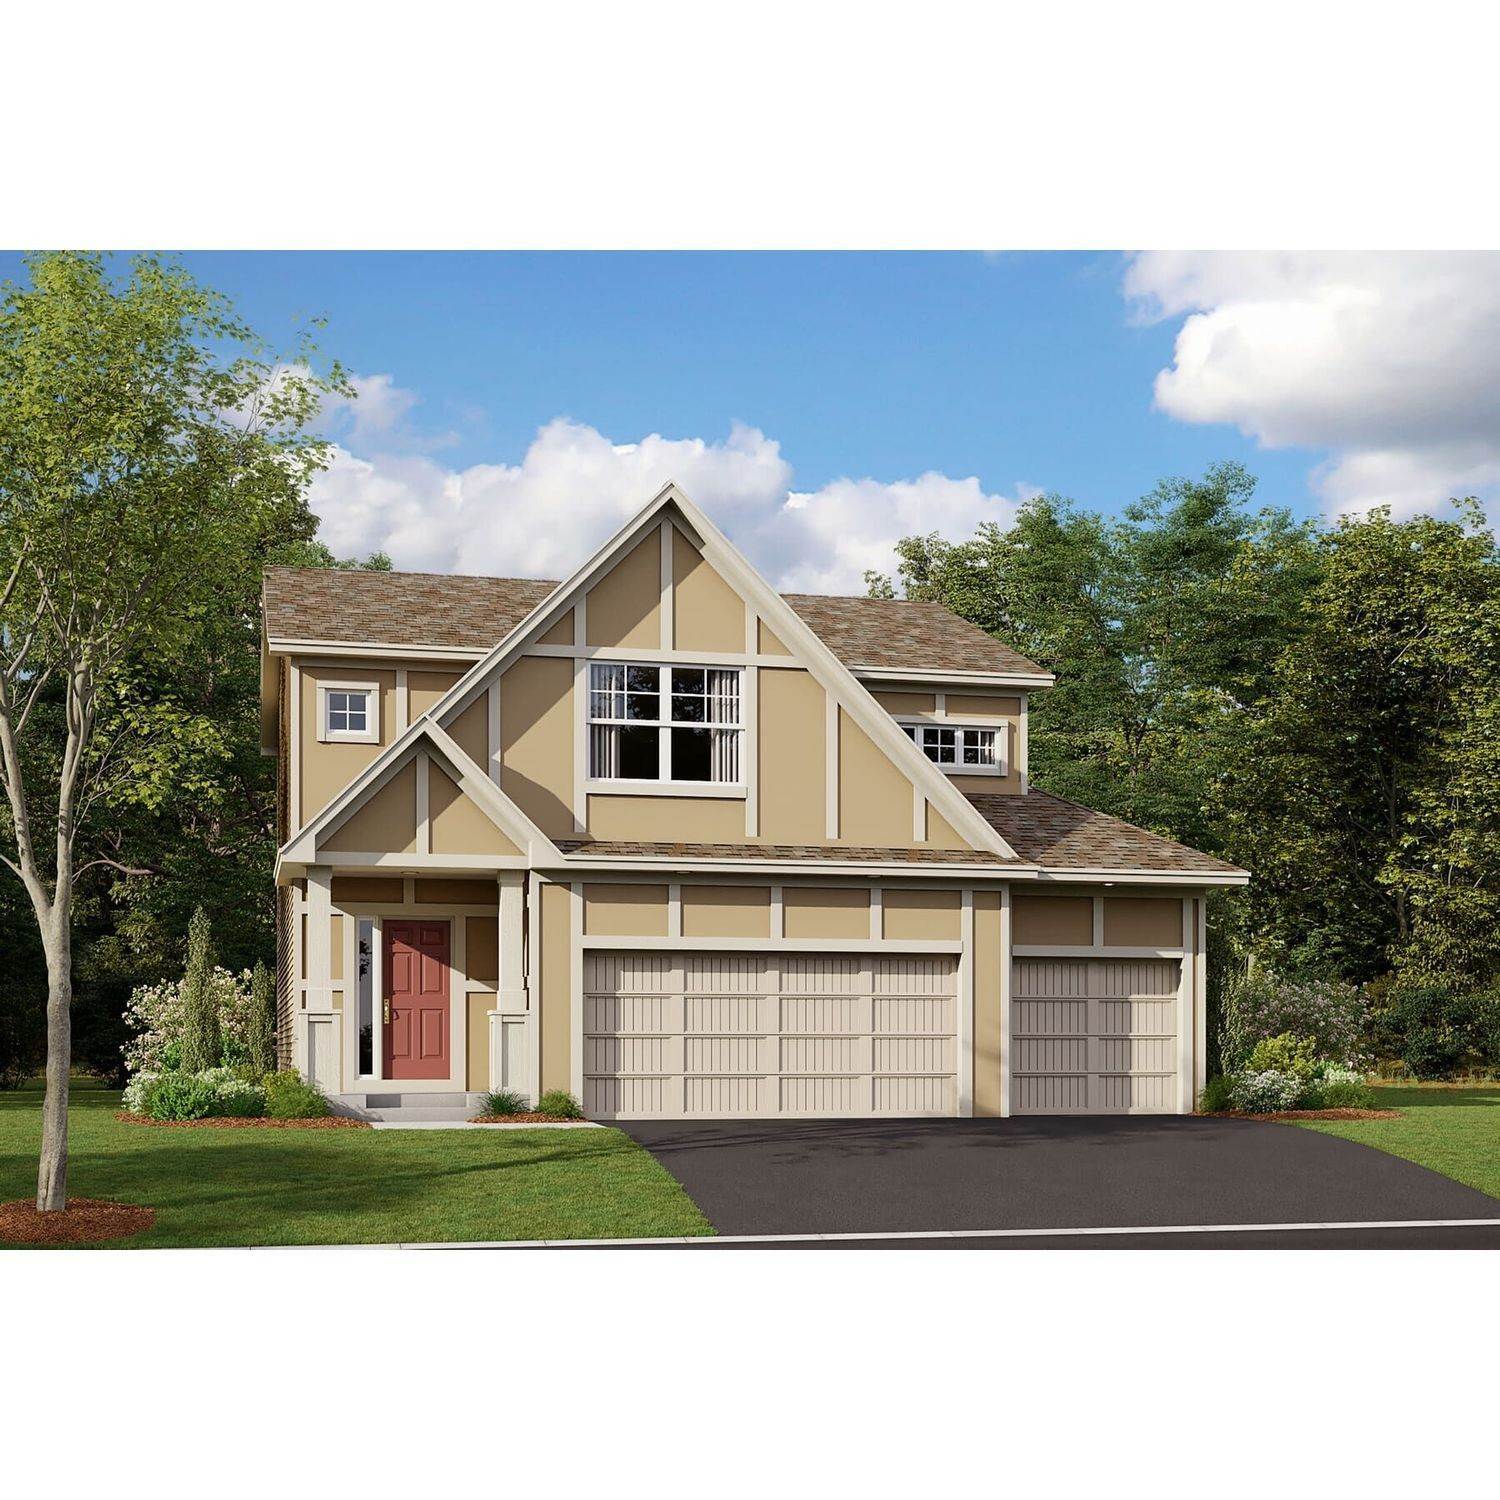 Single Family for Sale at Corcoran, MN 55340